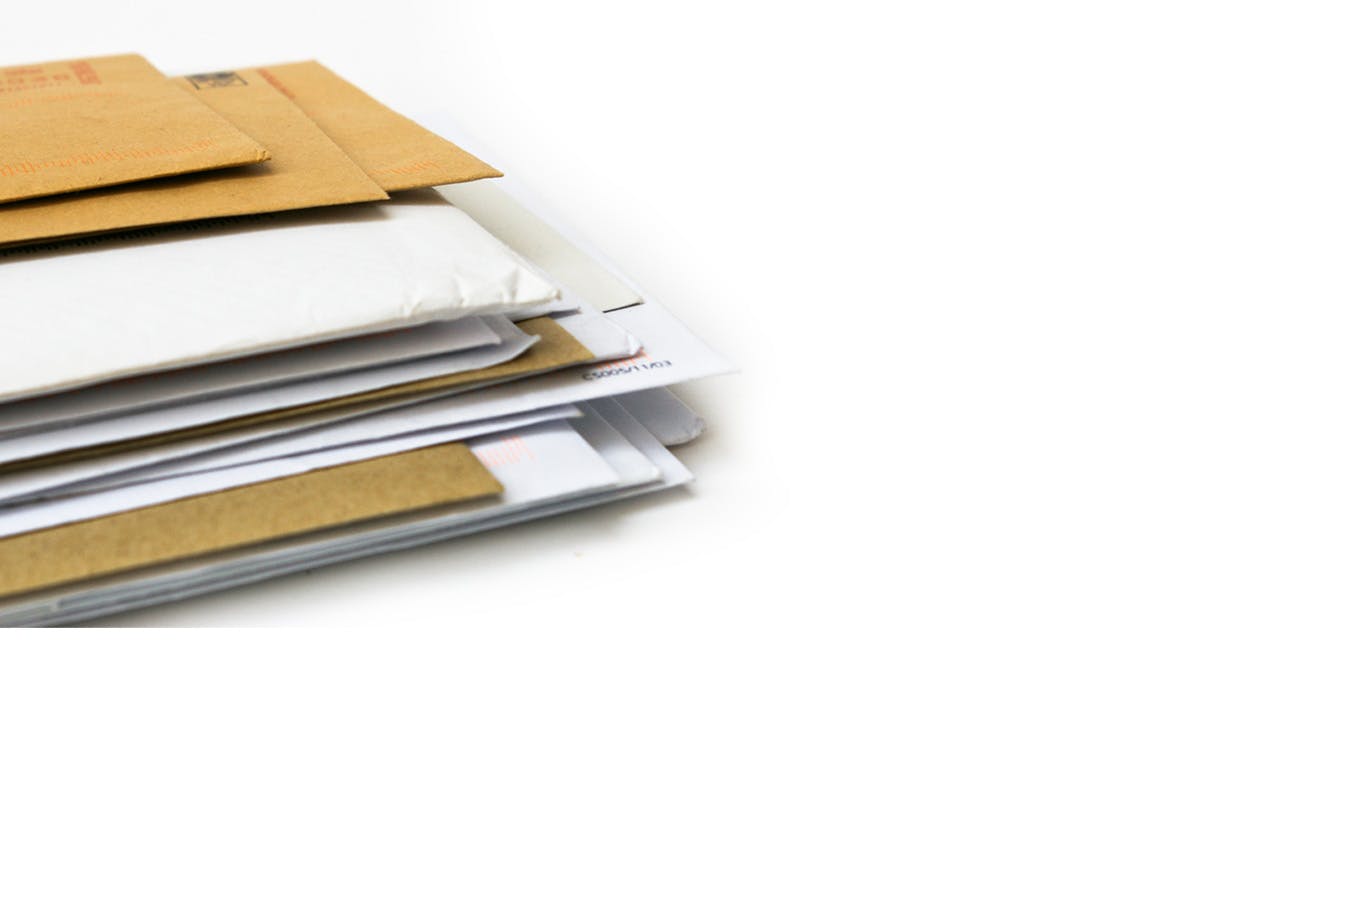 stacks of varying mail items